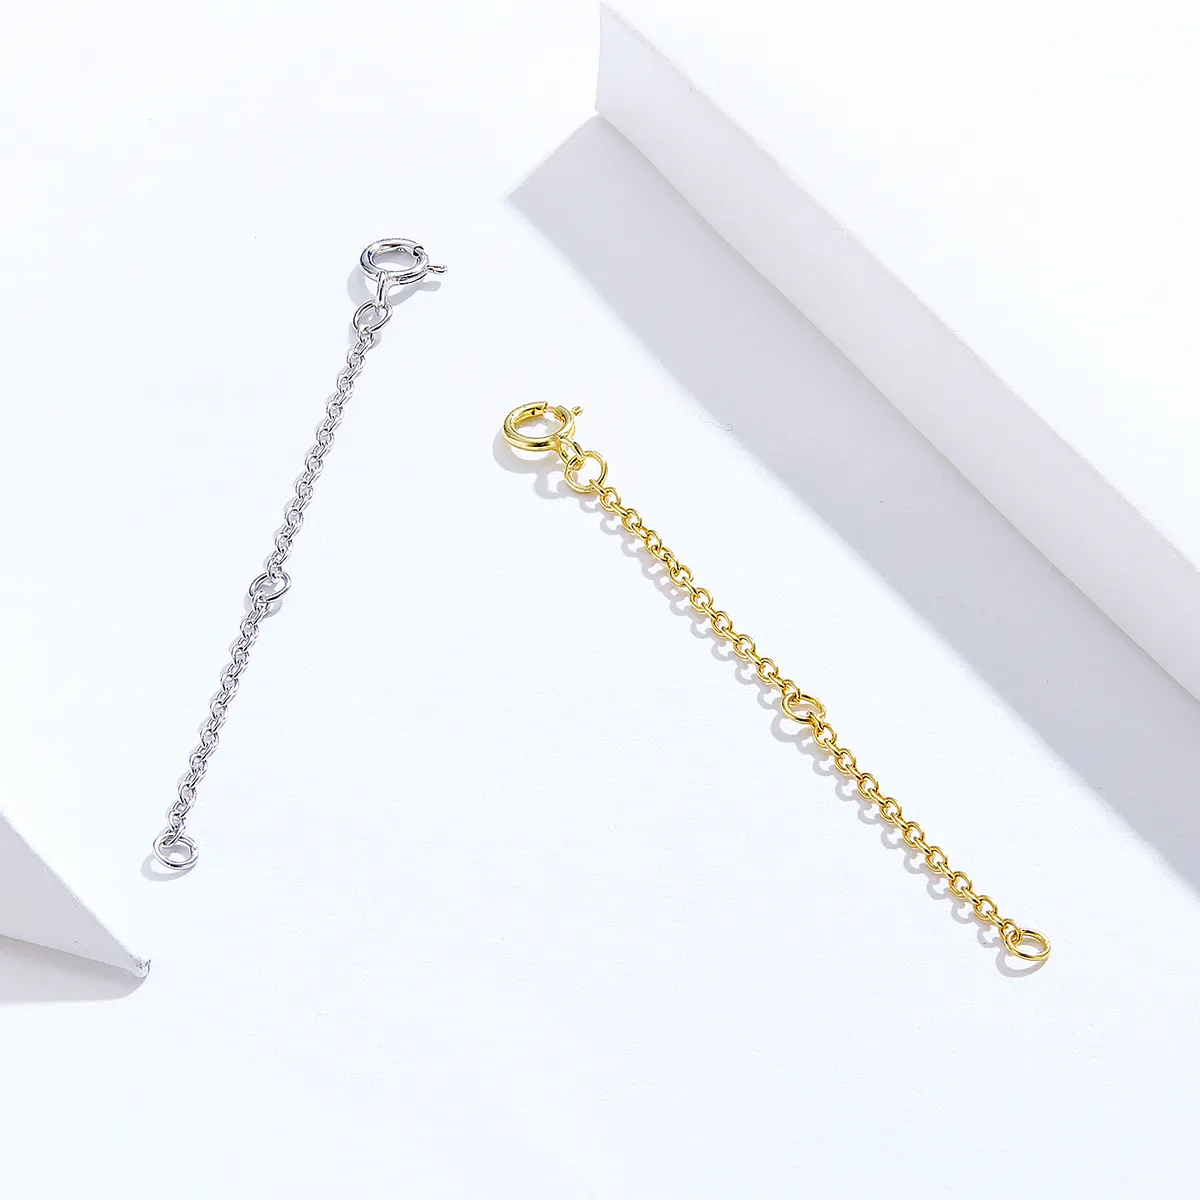 Pandora Style Extension Chain Necklace Extension Chain - SCA015-6B